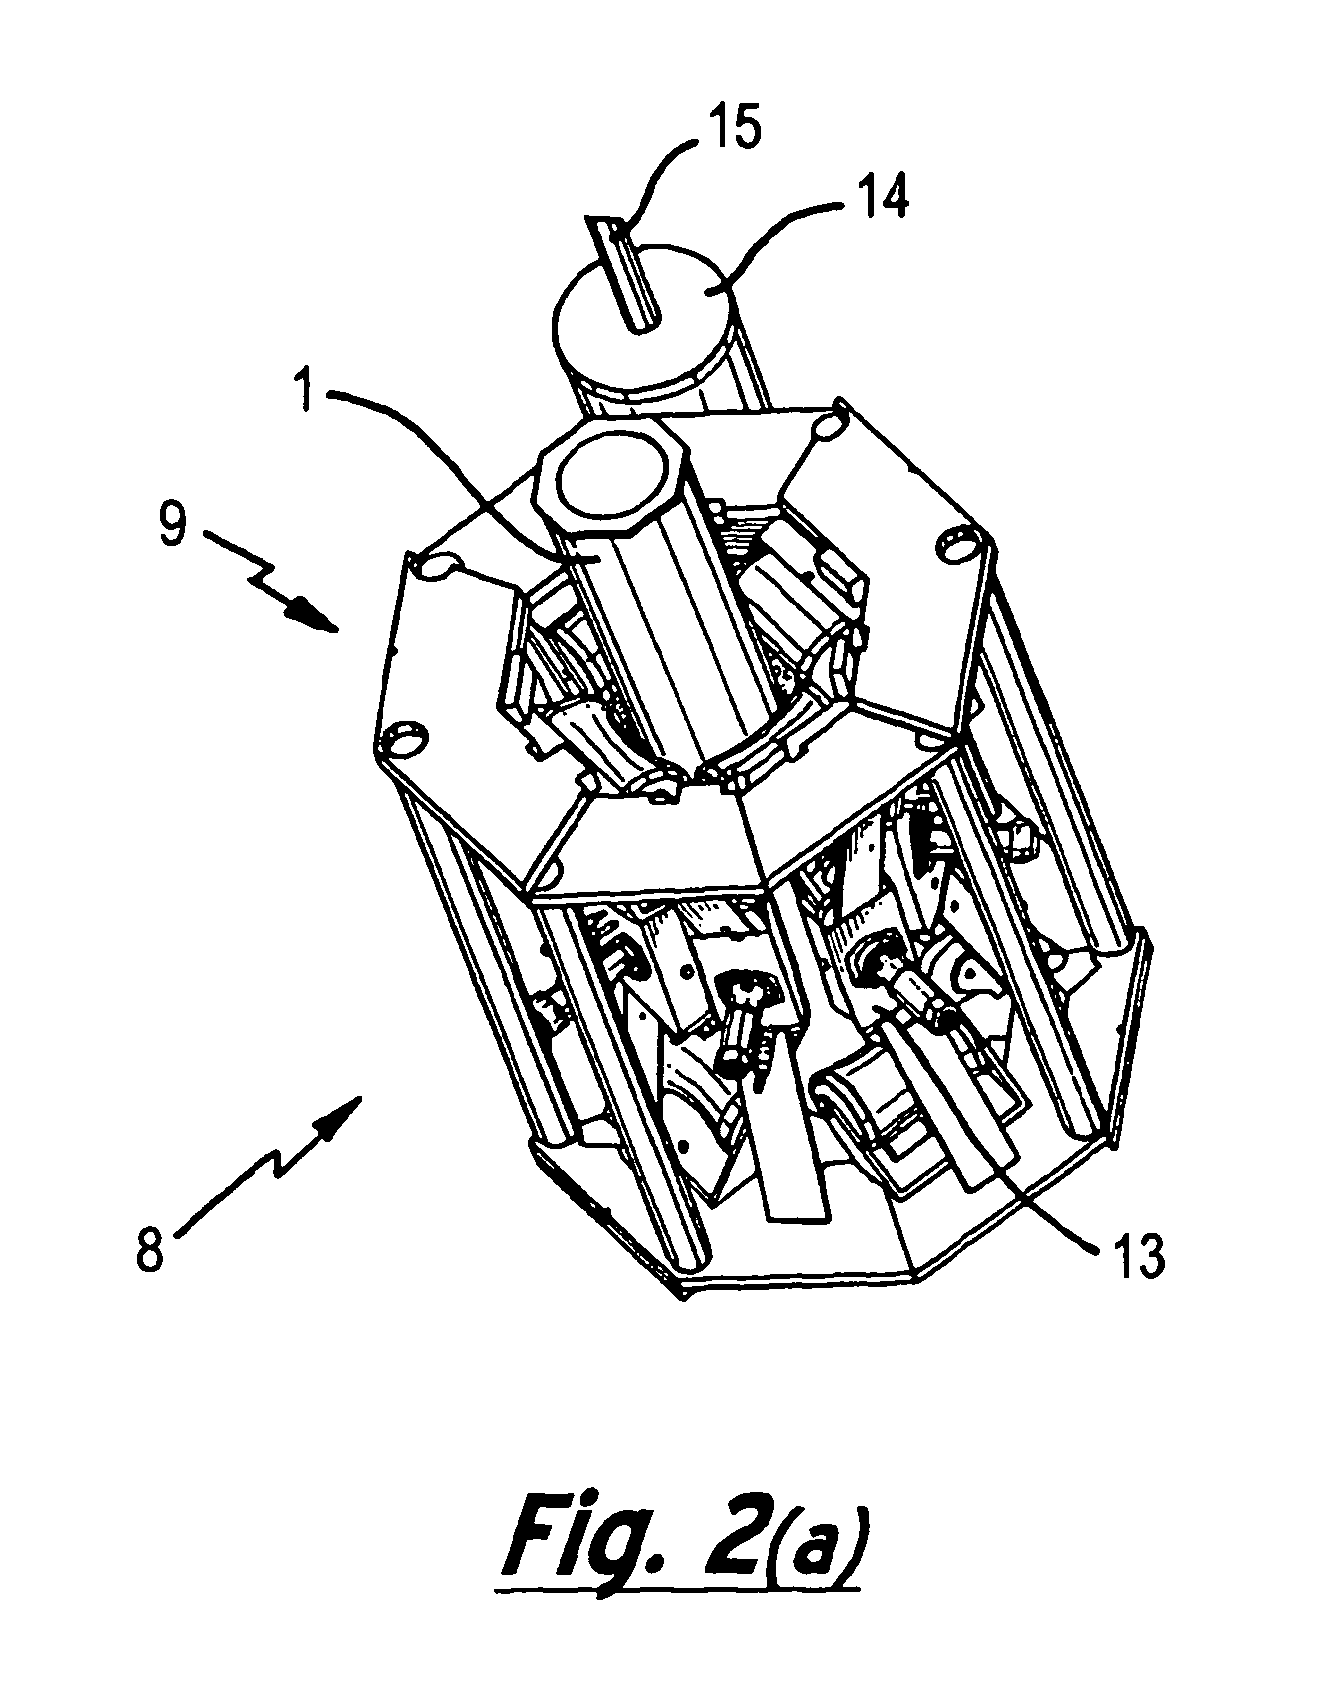 Electromagnet inspection apparatus with a movable magnet and method for non-destructive testing of electrically conductive test components